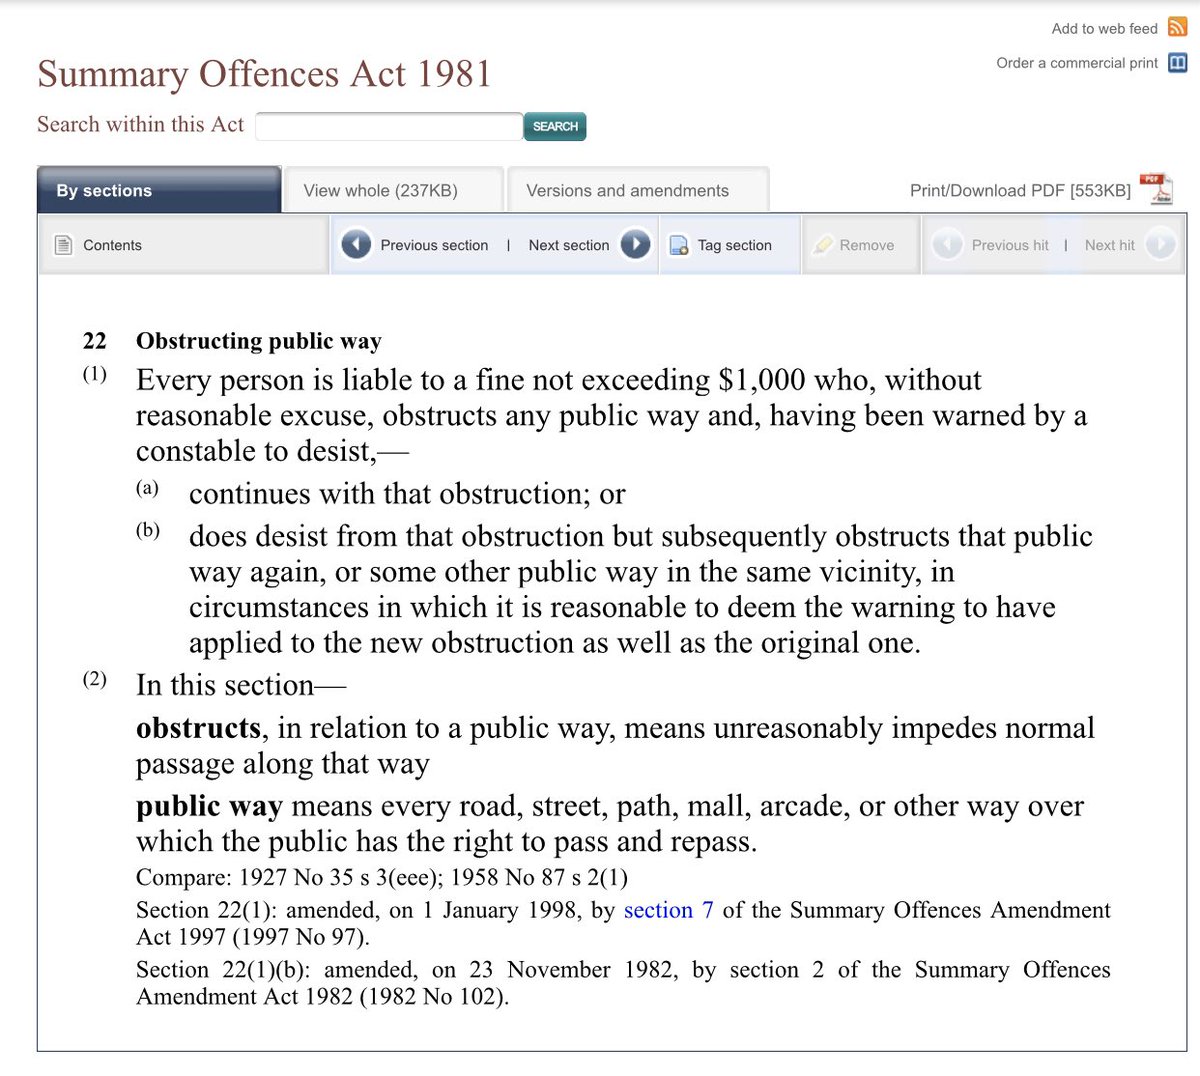 The most squarely applicable offence is s22 of the Summary Offences Act. But that injects doses of reasonableness into the mix.